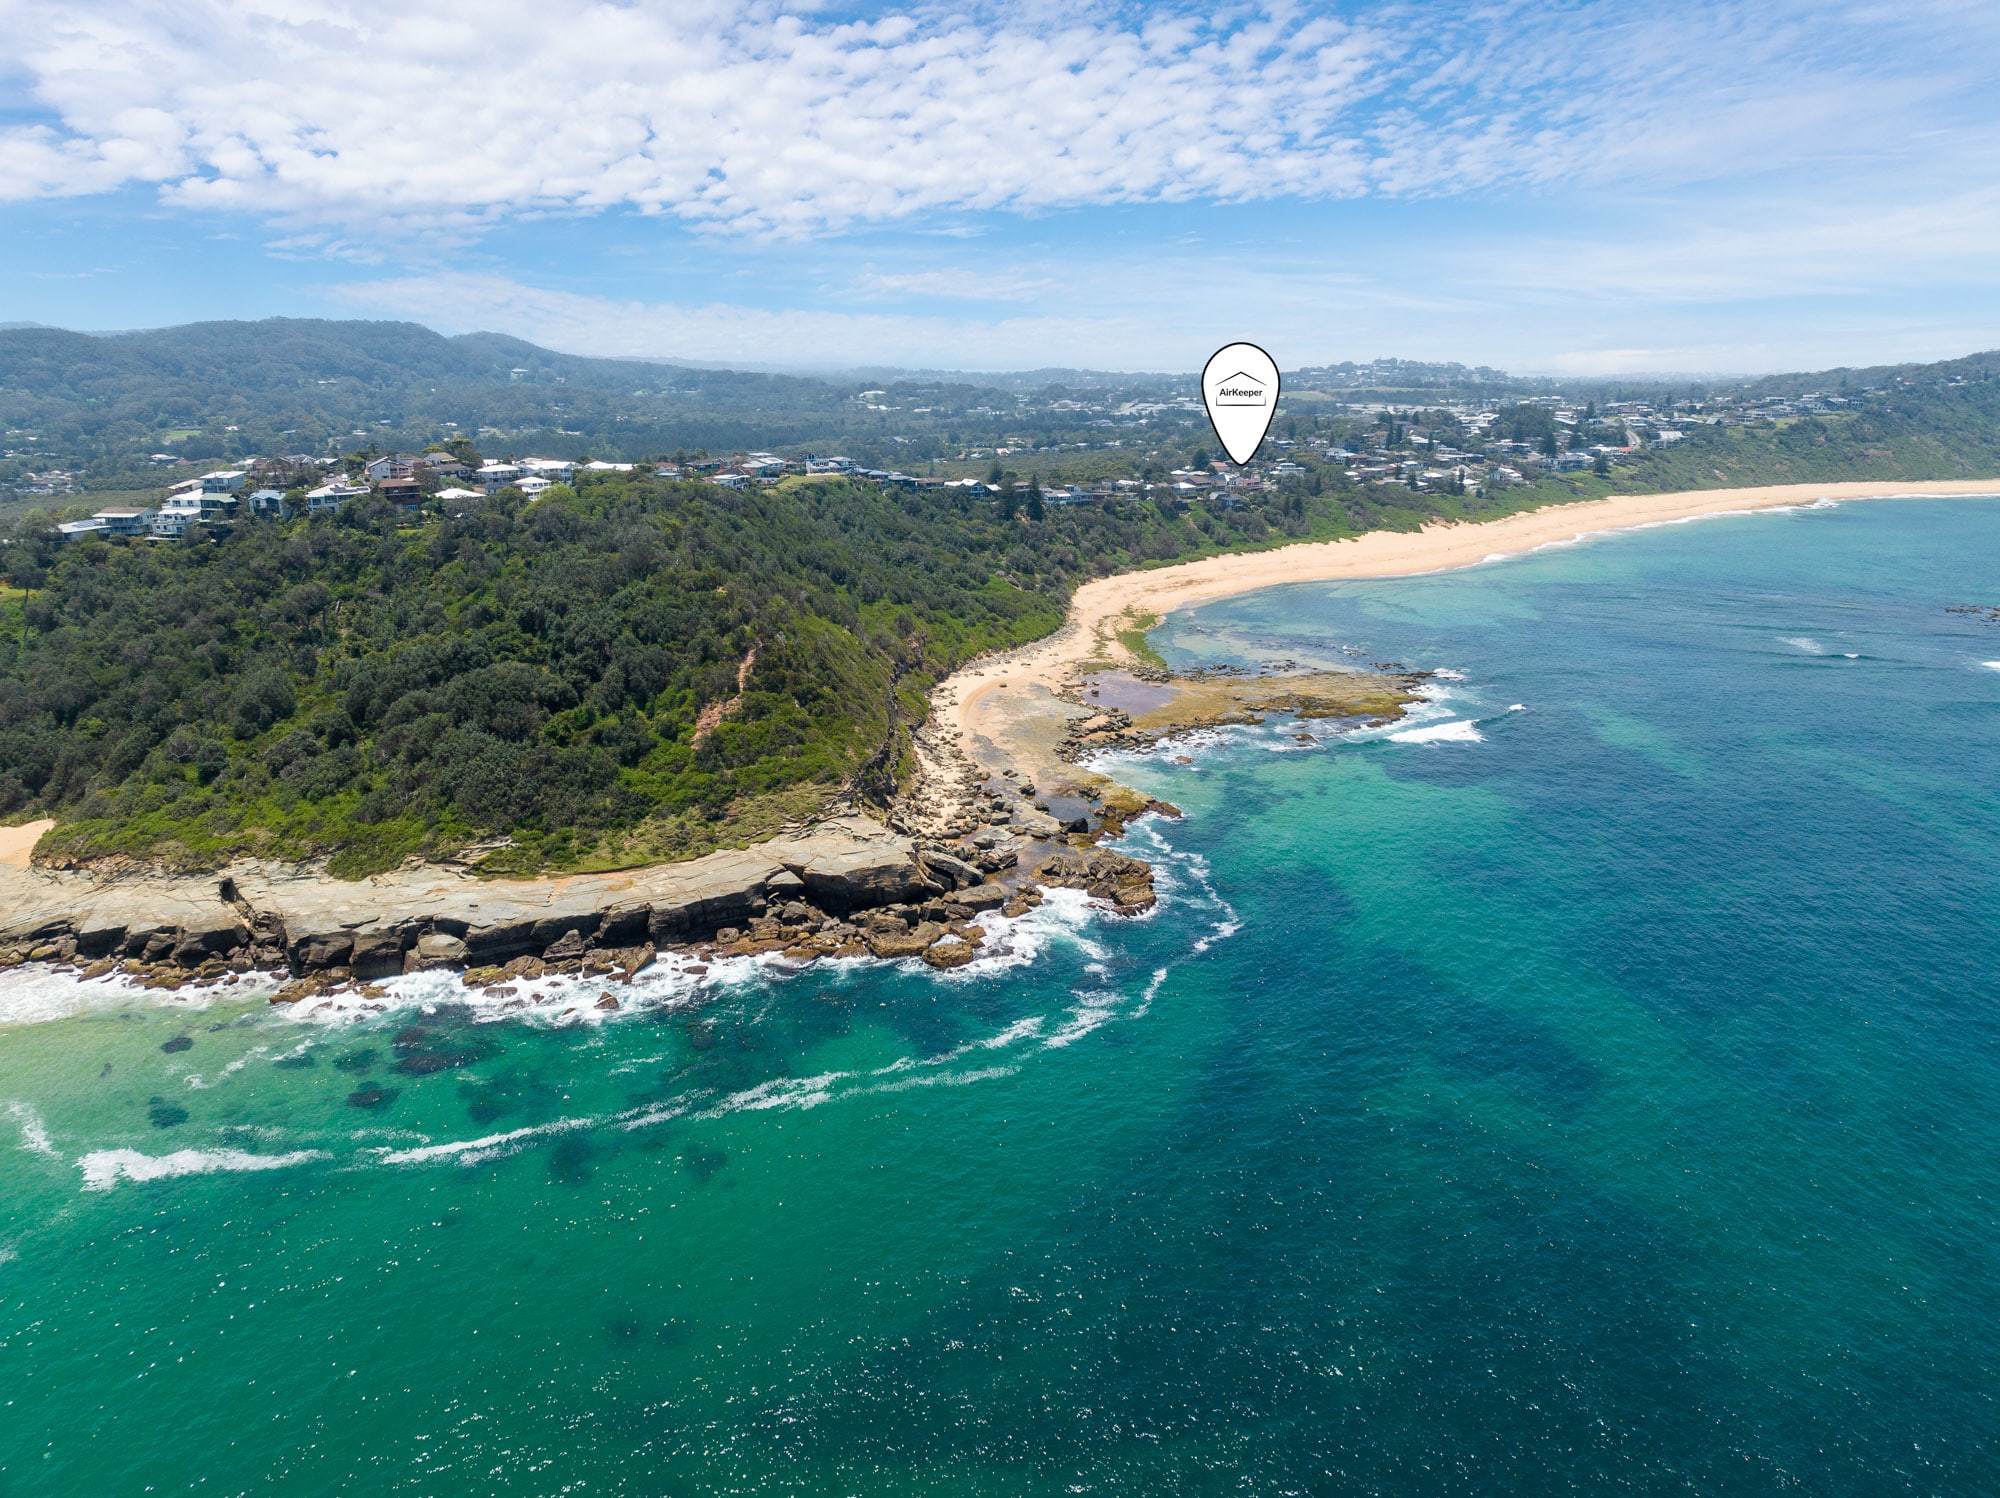 Forresters Beach offers the perfect opportunity to take some time out for yourself and get back to nature